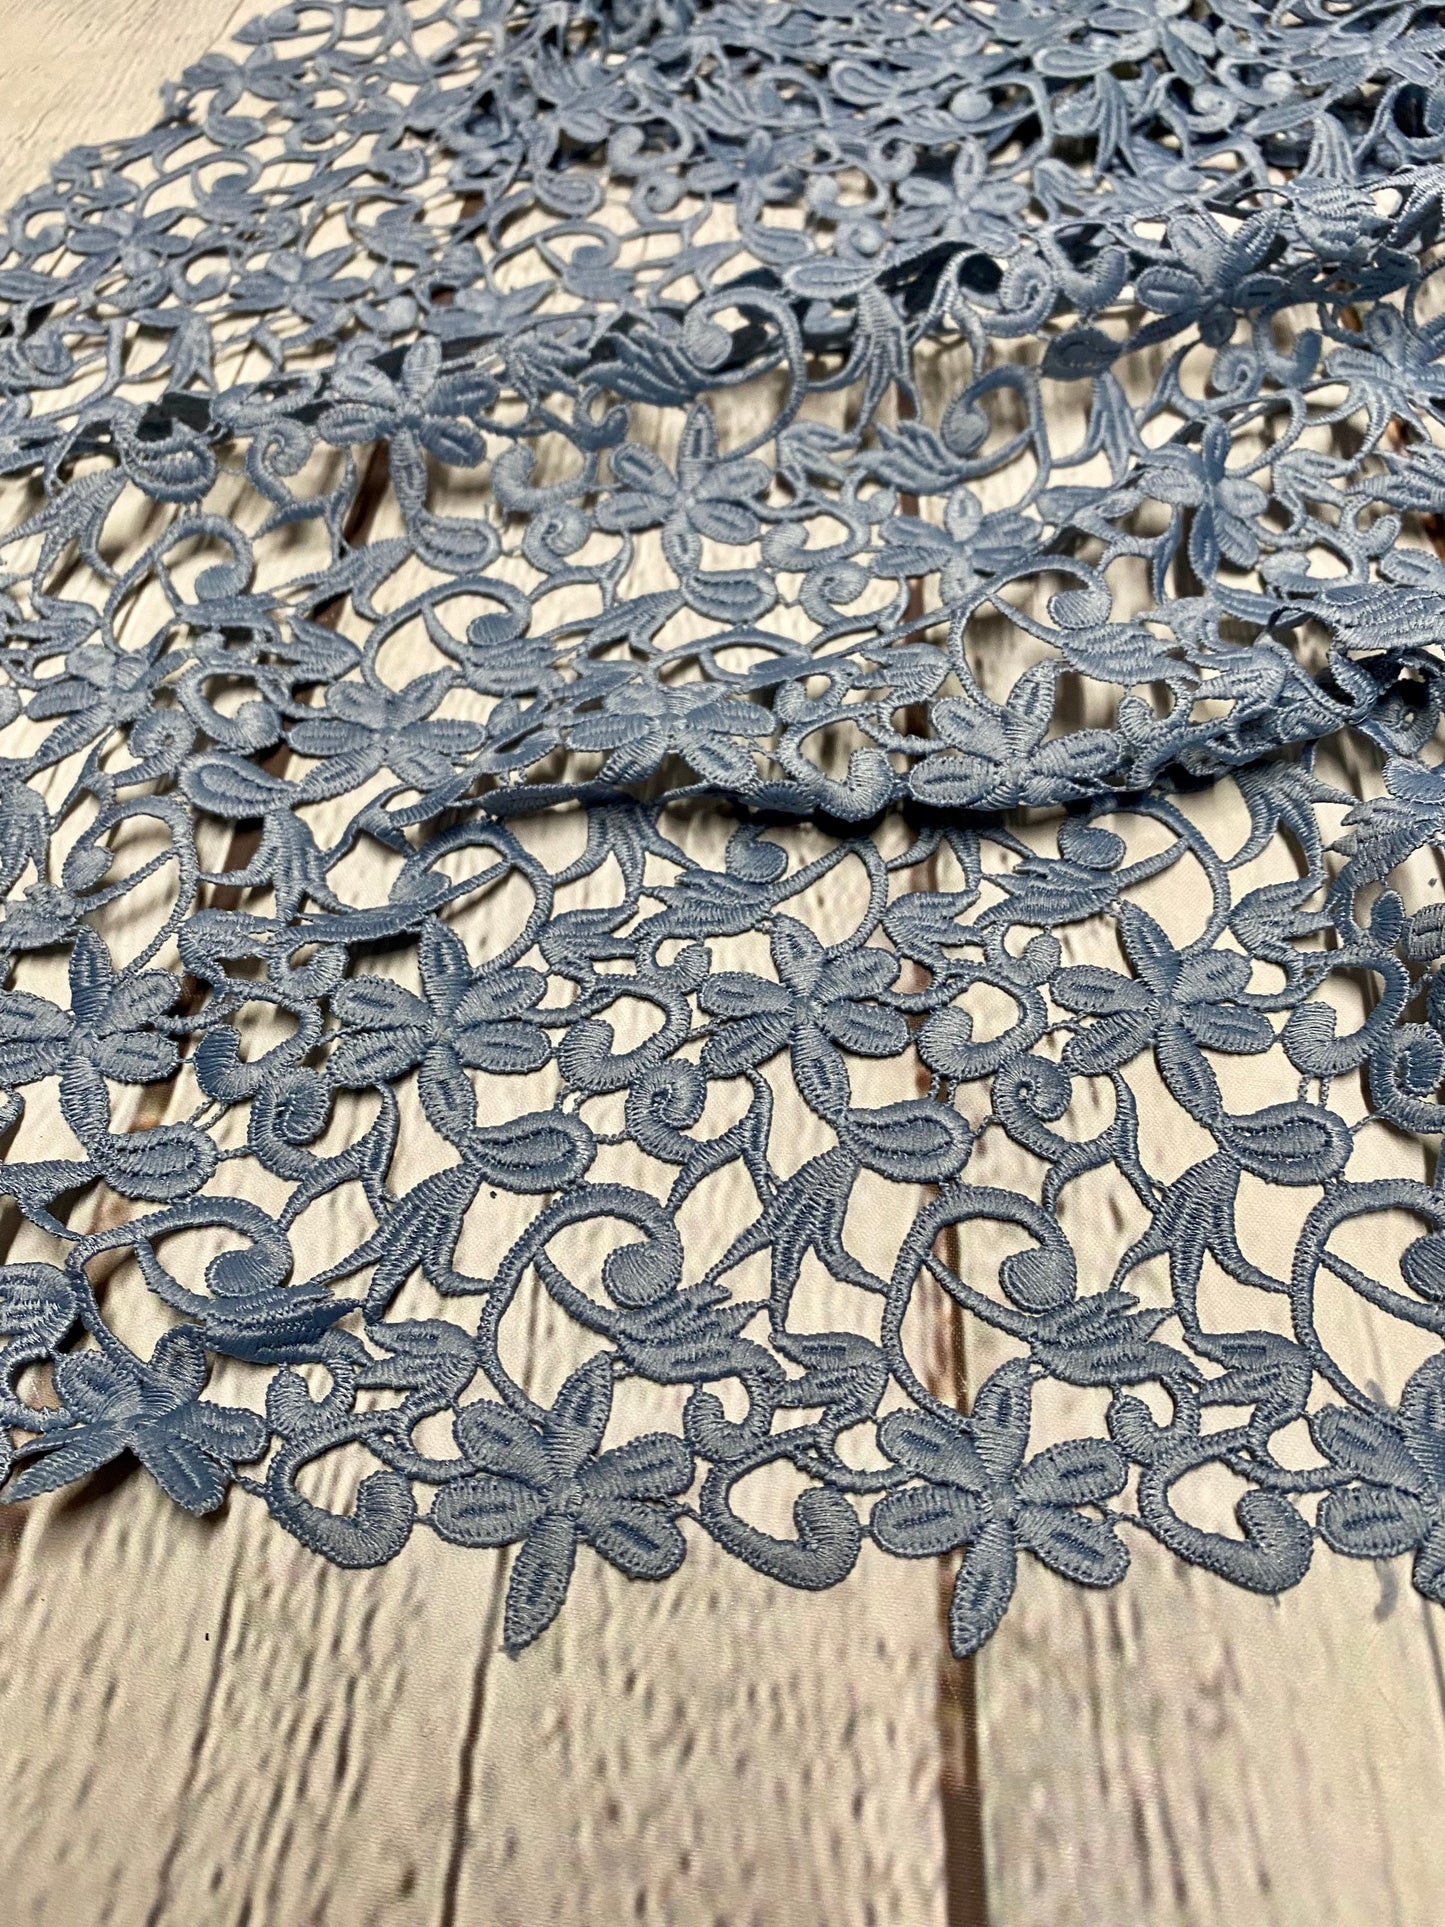 Fancy Crochet Lace Fabric By The Yard - Fabric for Dress, Skirt, Blouse, Lingerie, intimates, Bra